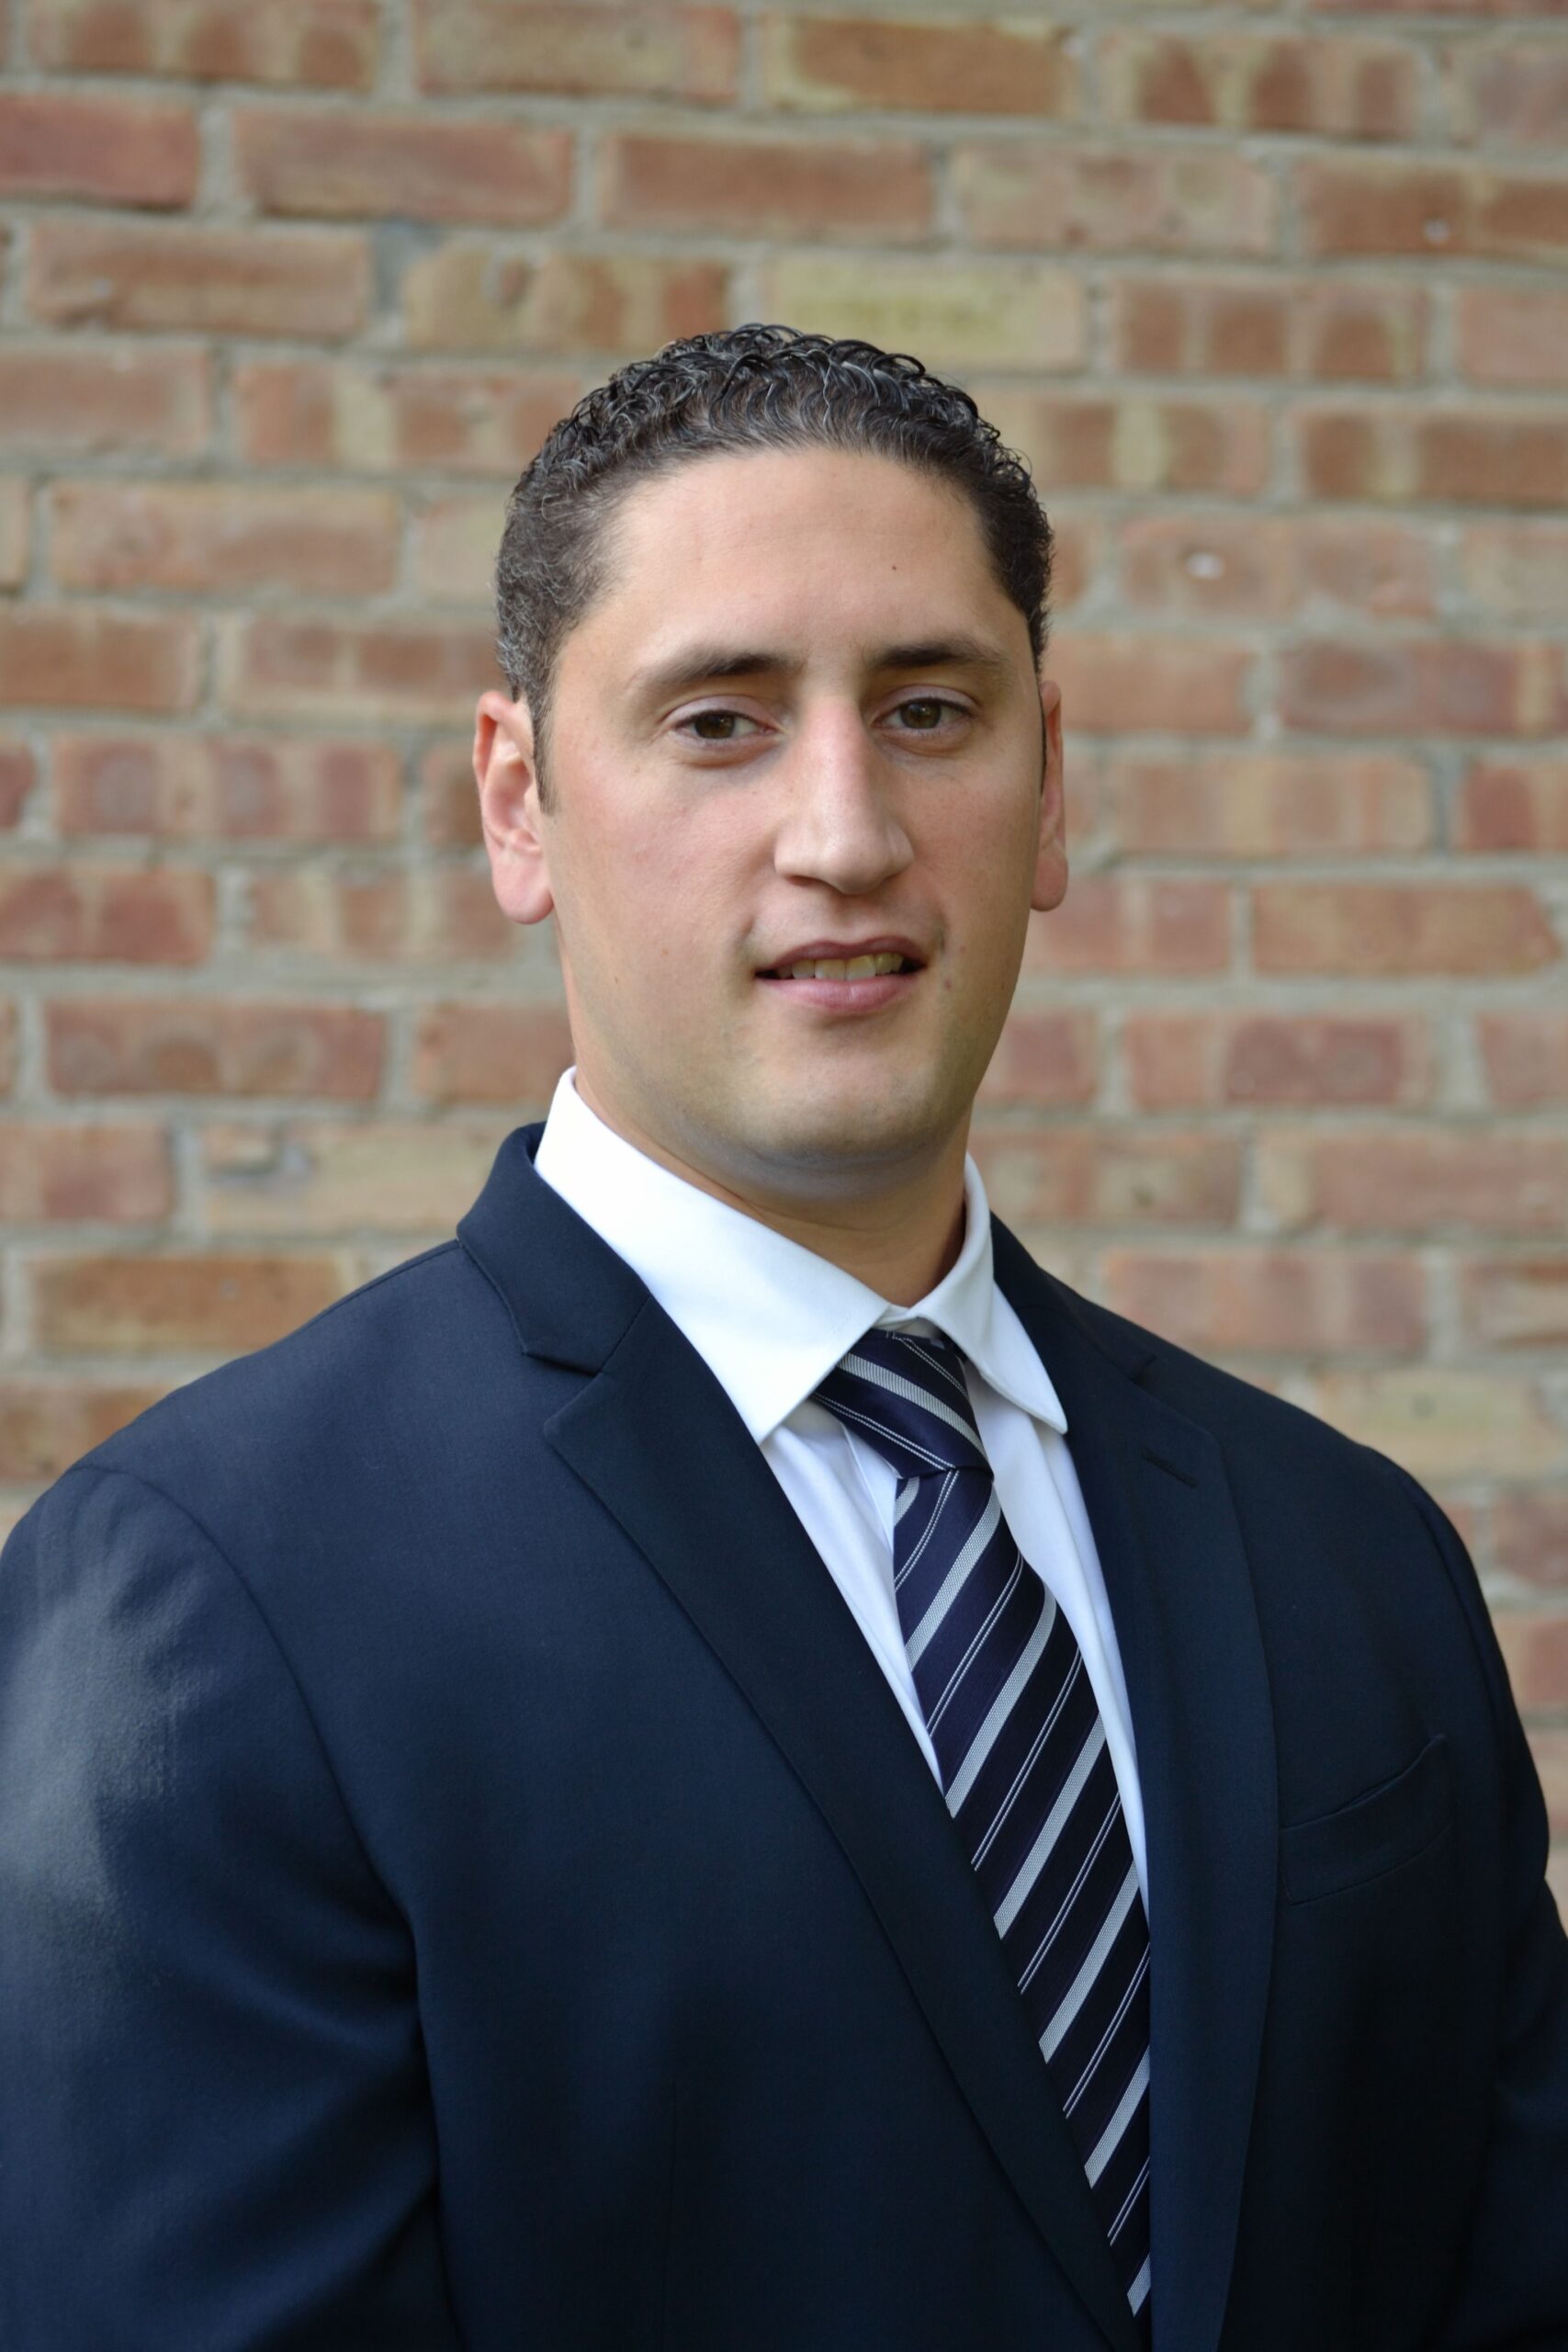 Anthony Mulé of Valbridge Property Advisors - Chicago Metro is a member of XPX Chicago